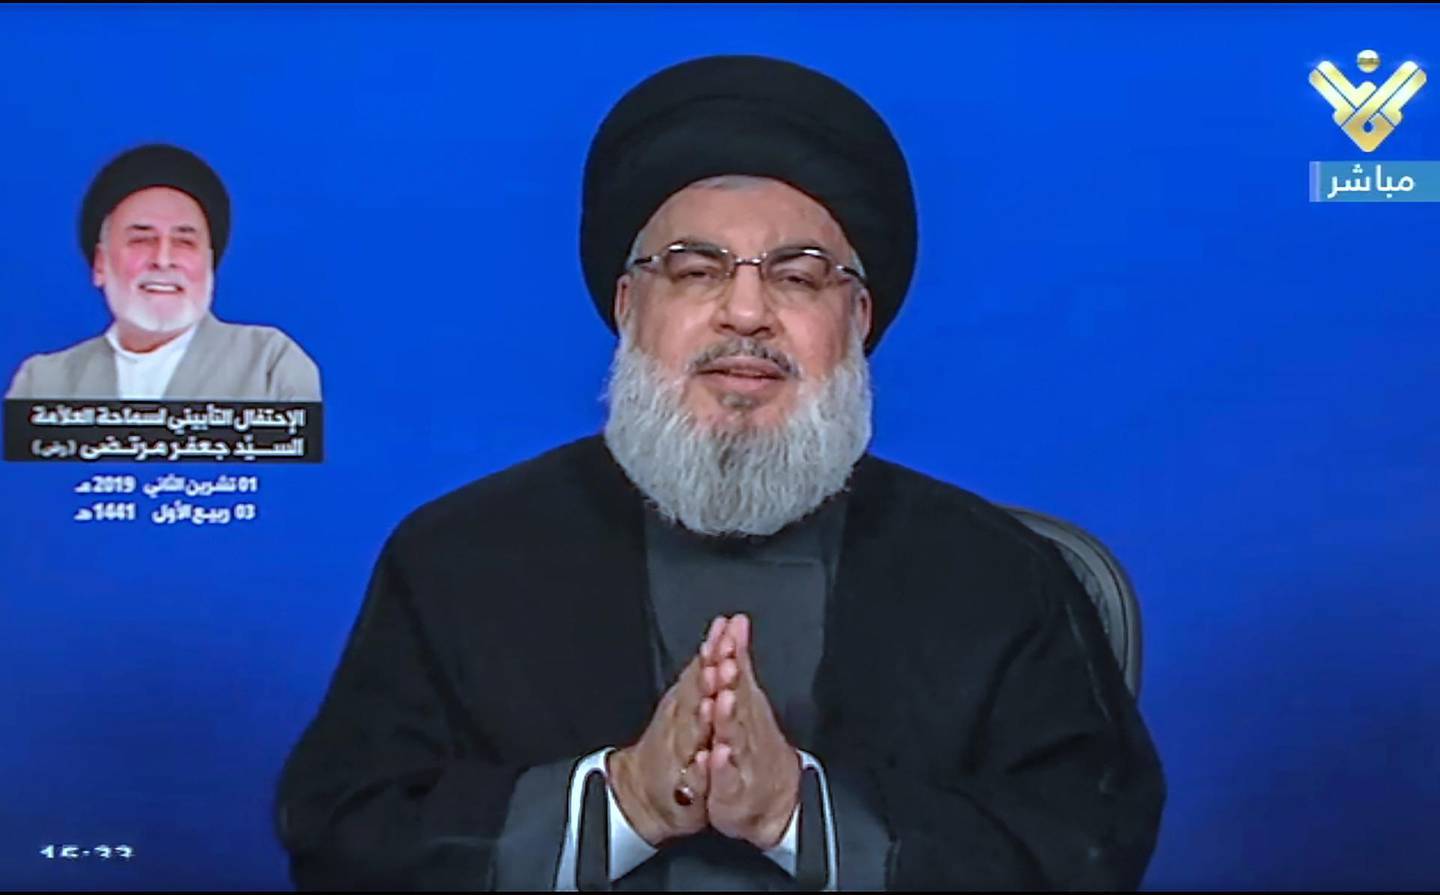 epa07964771 A handout grab photo made from Hezbollah's al-Manar TV shows Hezbollah leader Sayyed Hassan Nasrallah giving a televised address on the anniversary of Shiite cleric syed Jaafar Murtaza in Beirut, Lebanon, 01 November 2019. According to media reports, Nasrallah commented on recent developments in Lebanon calling for the formation of a new government that can gain the trust of the people and implement their reform demands.  EPA/AL-MANAR TV GRAB HANDOUT  HANDOUT EDITORIAL USE ONLY/NO SALES